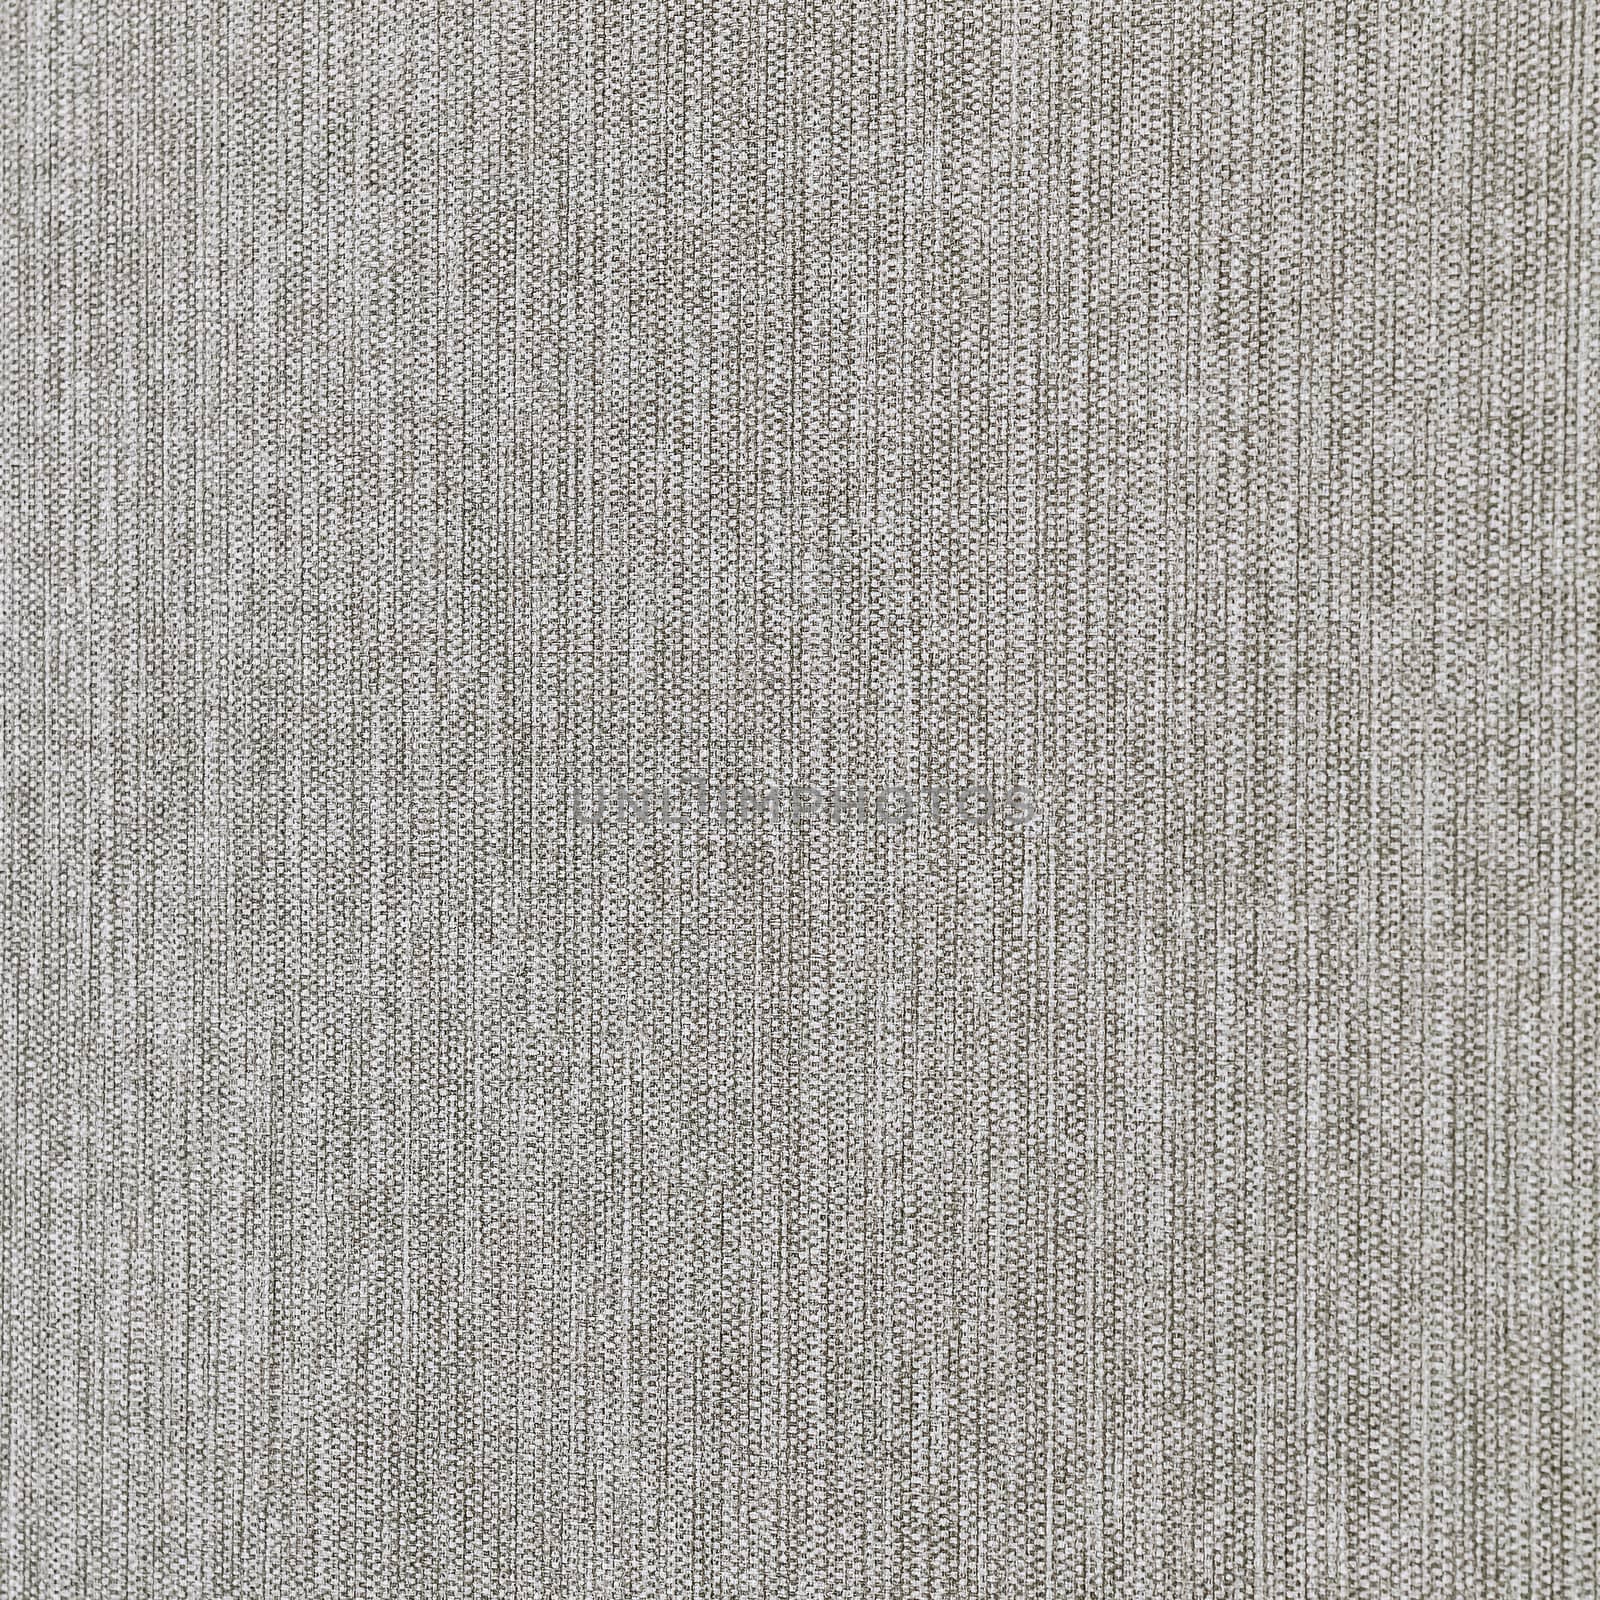 Gray-brown mottled paper texture, can be used for background by bonilook